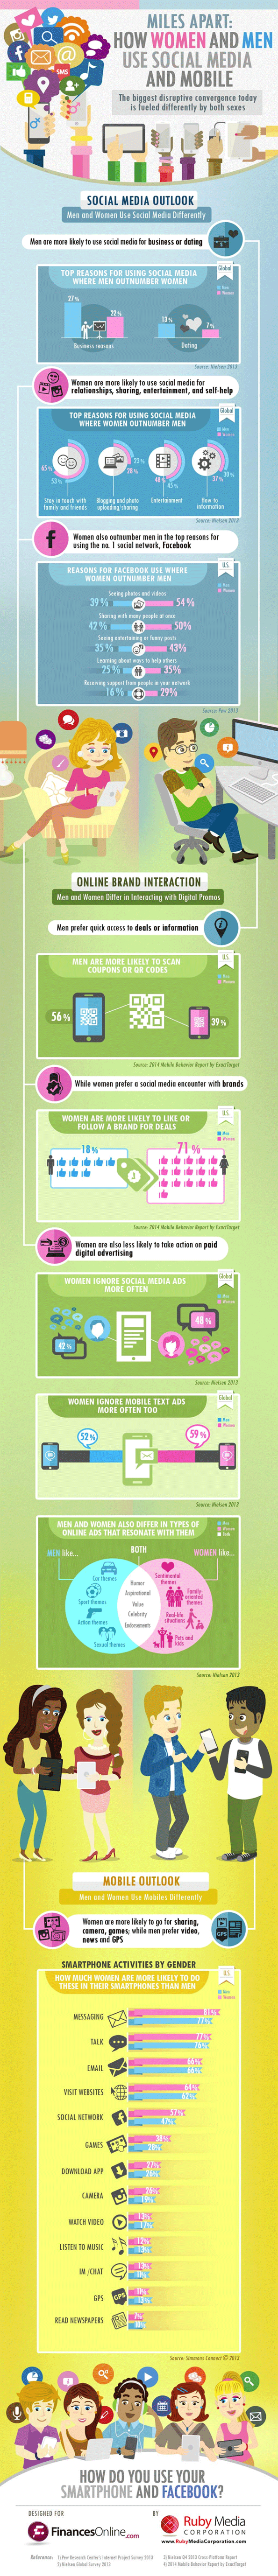 Social Media and Mobile Use by Gender Infographic image